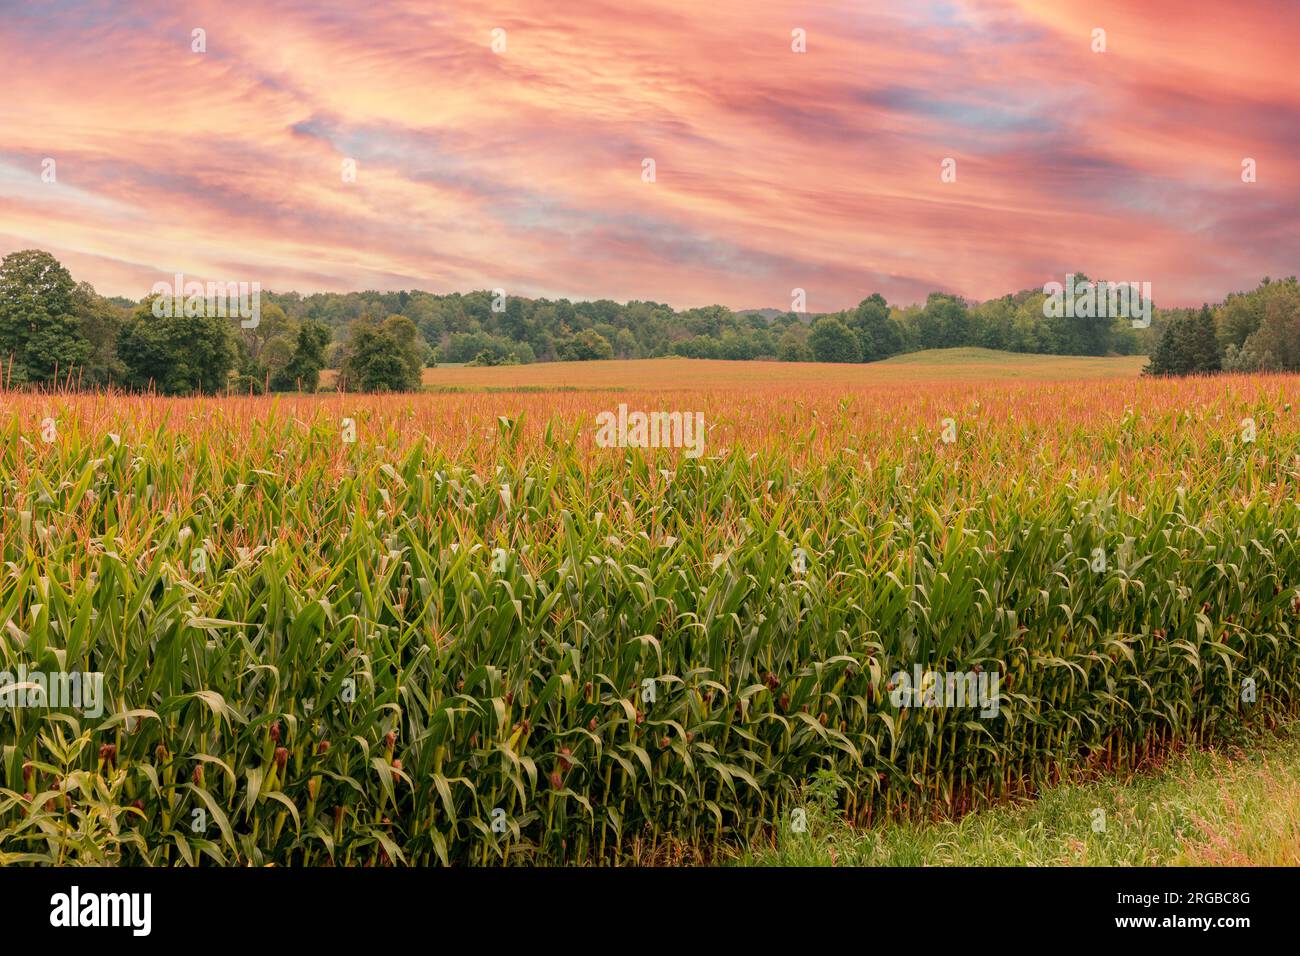 Sunny, warm weather along with good rains has made for a bumper corn crop Stock Photo